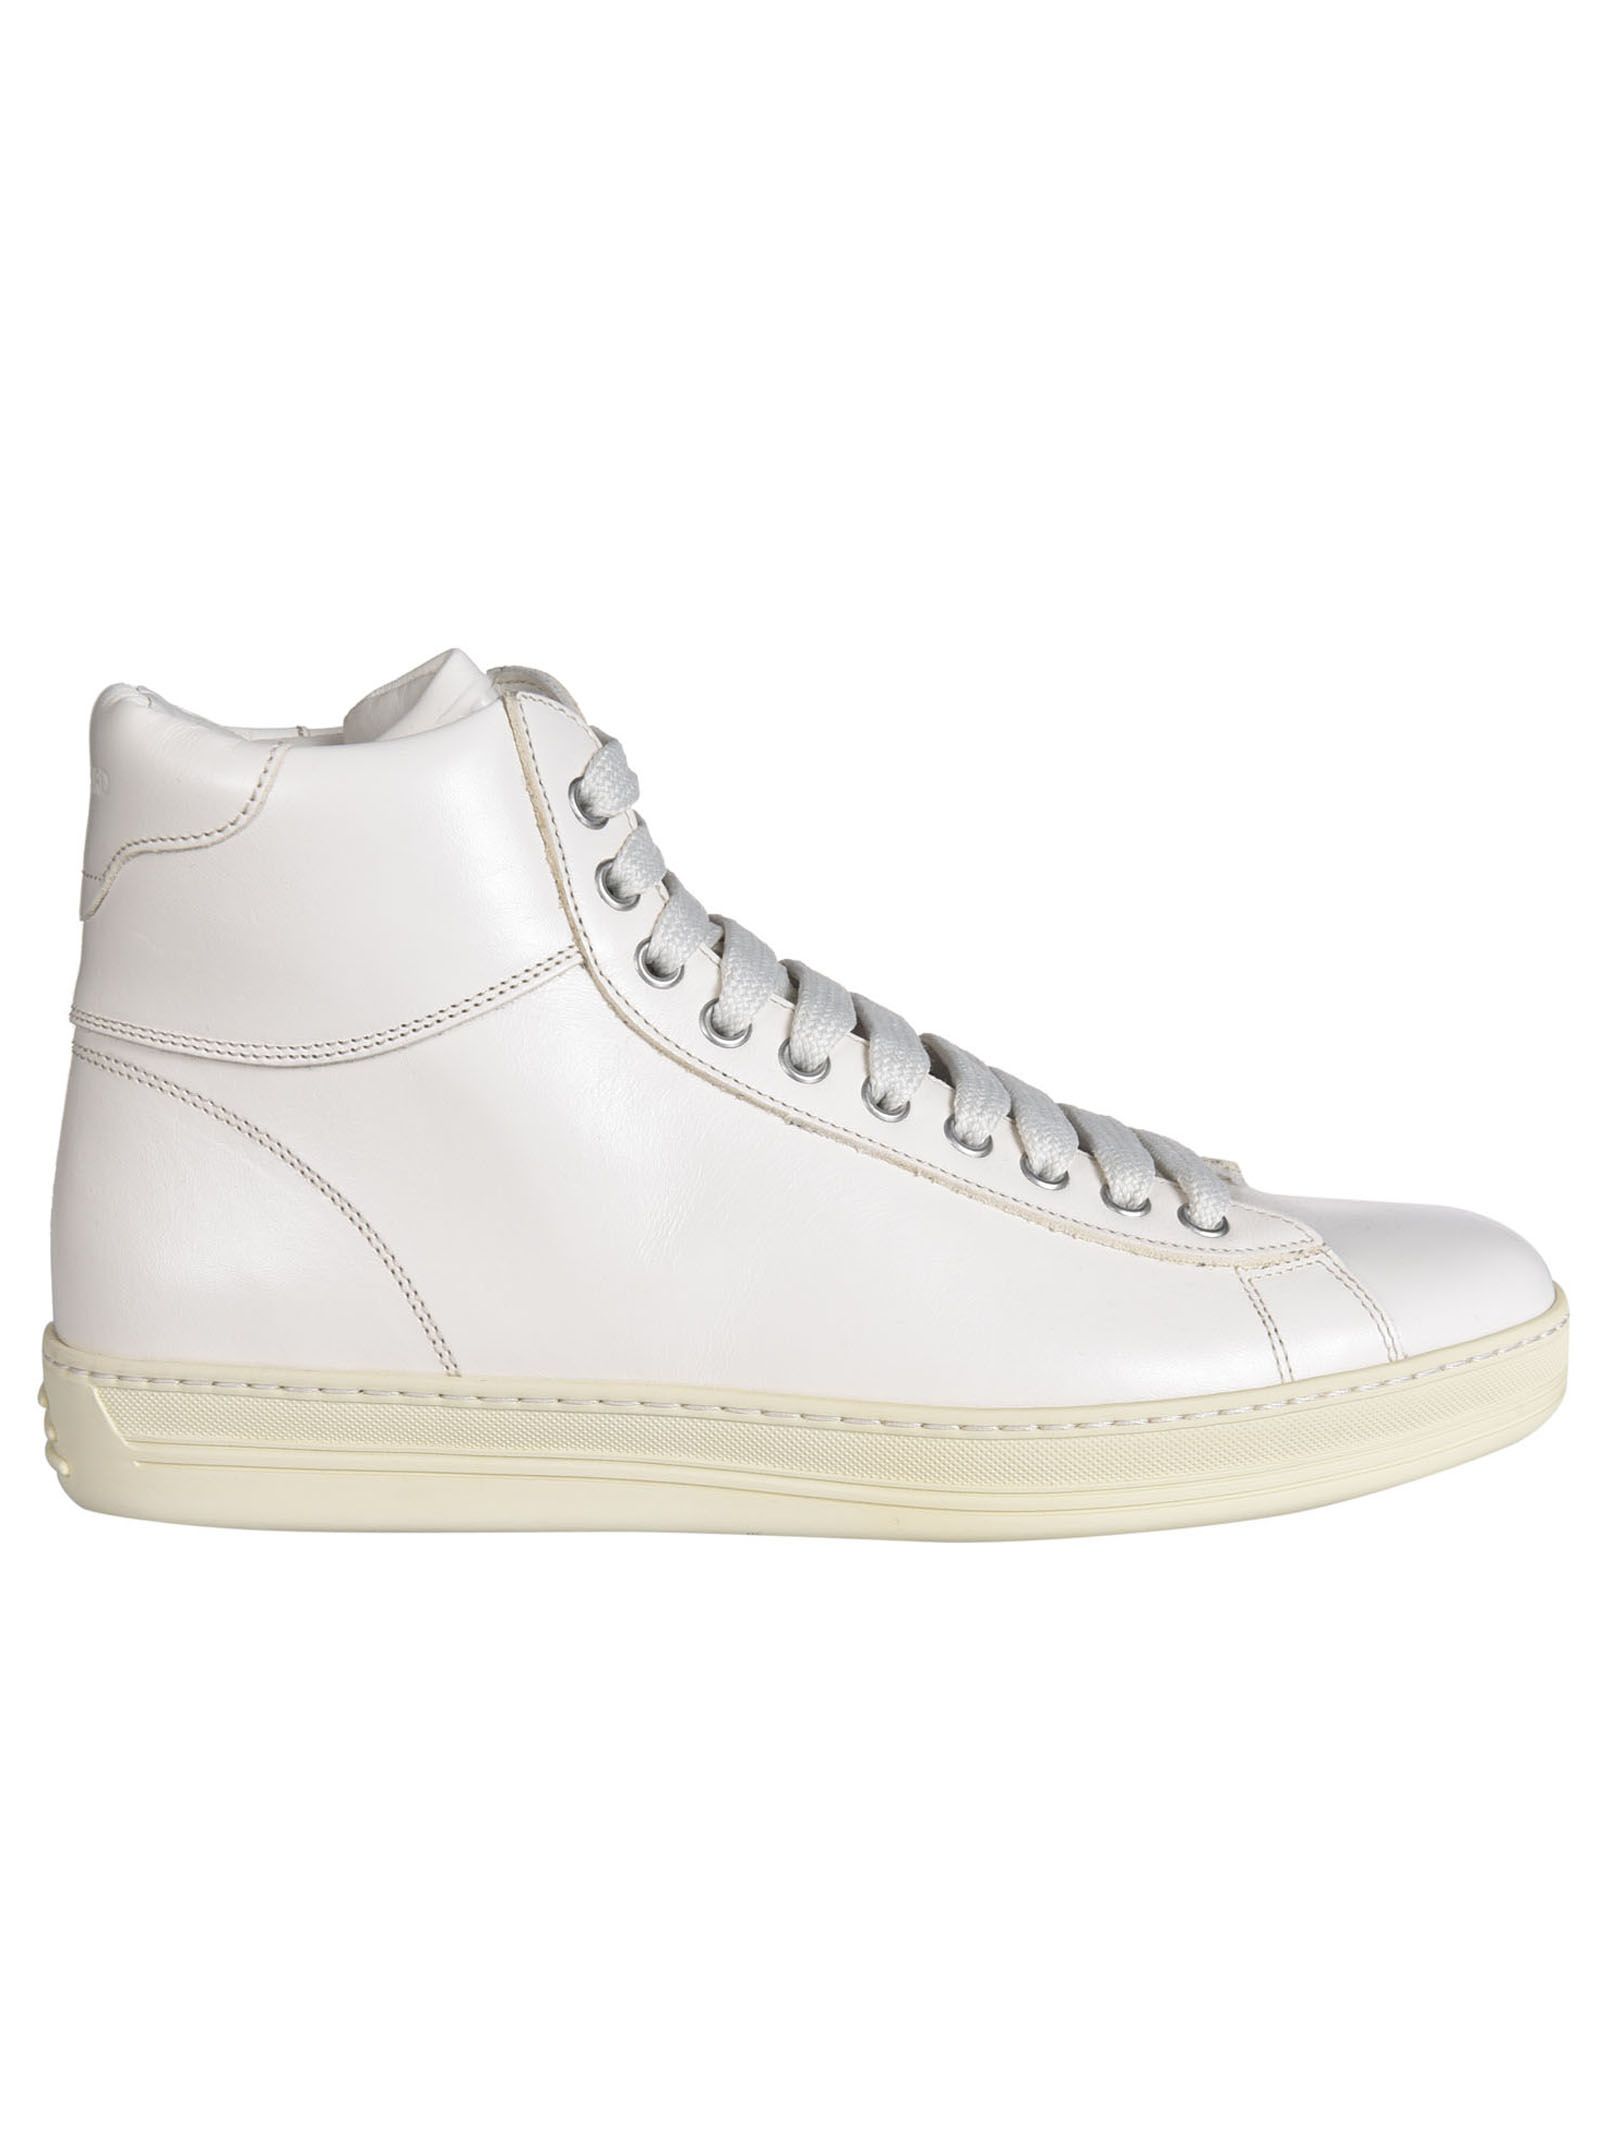 Tom Ford Leather Hi-top Sneakers | ModeSens